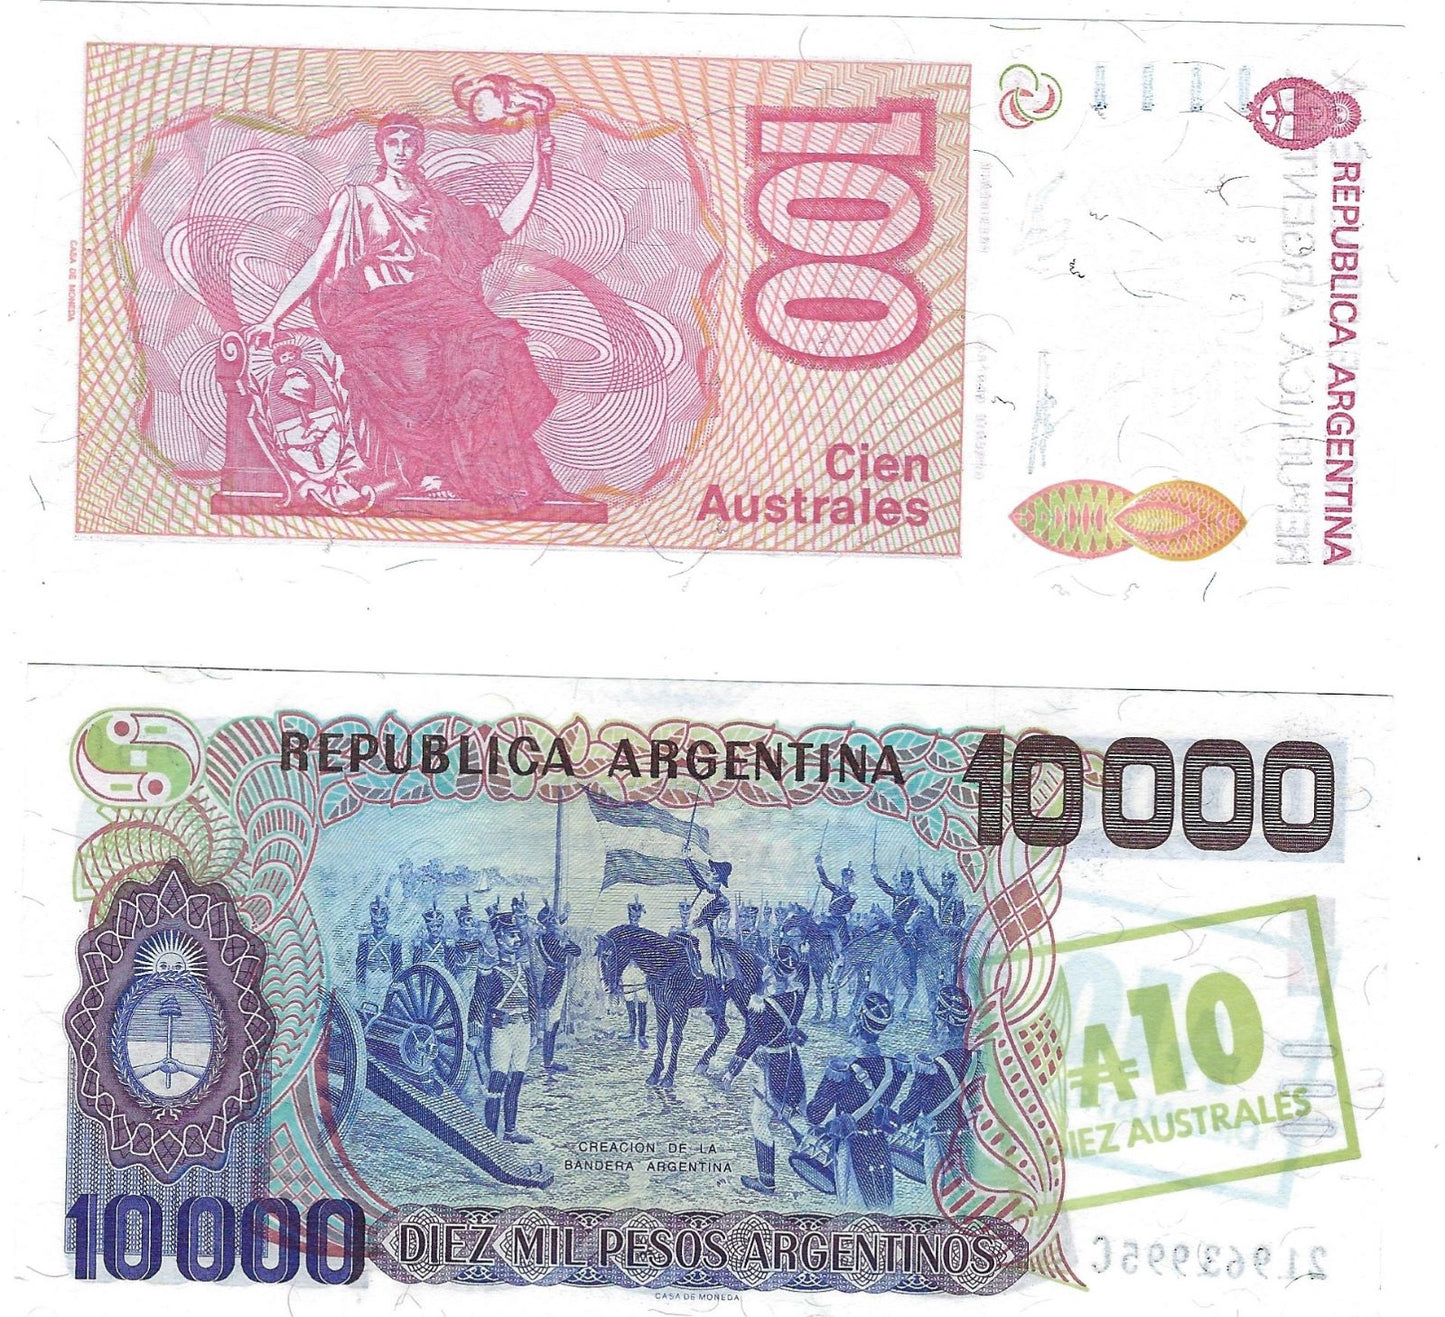 ARGENTINA 10 Australes on 10,000 Pesos Argentinos &100 AUSTRALES UNC MINT OLD BANKNOTE Including Lucky 8 .A1A